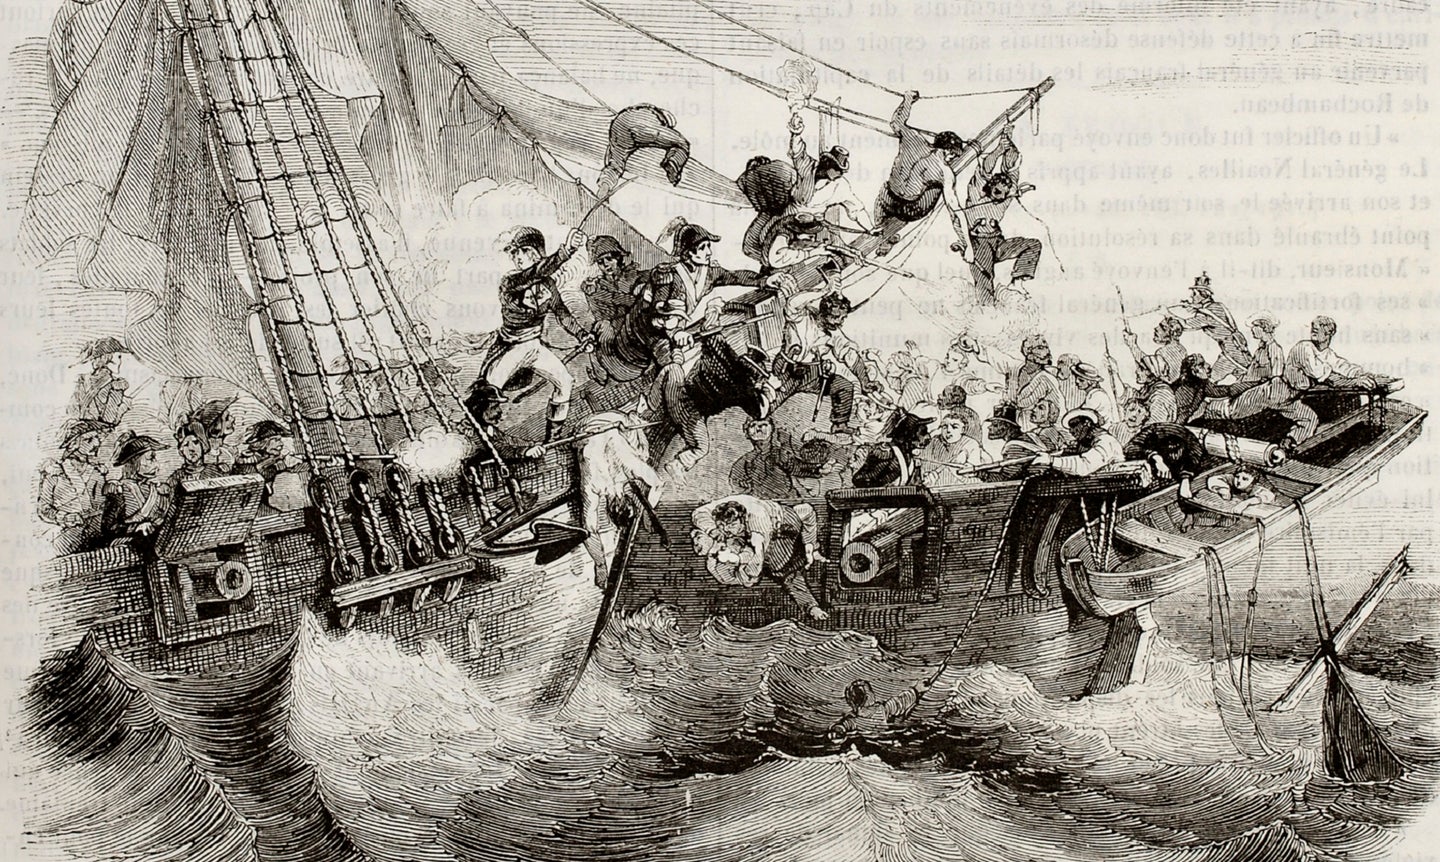 British navy boarding a ship where many sailors are sickened by scurvy from vitamin deficiency. Black and white illustration.